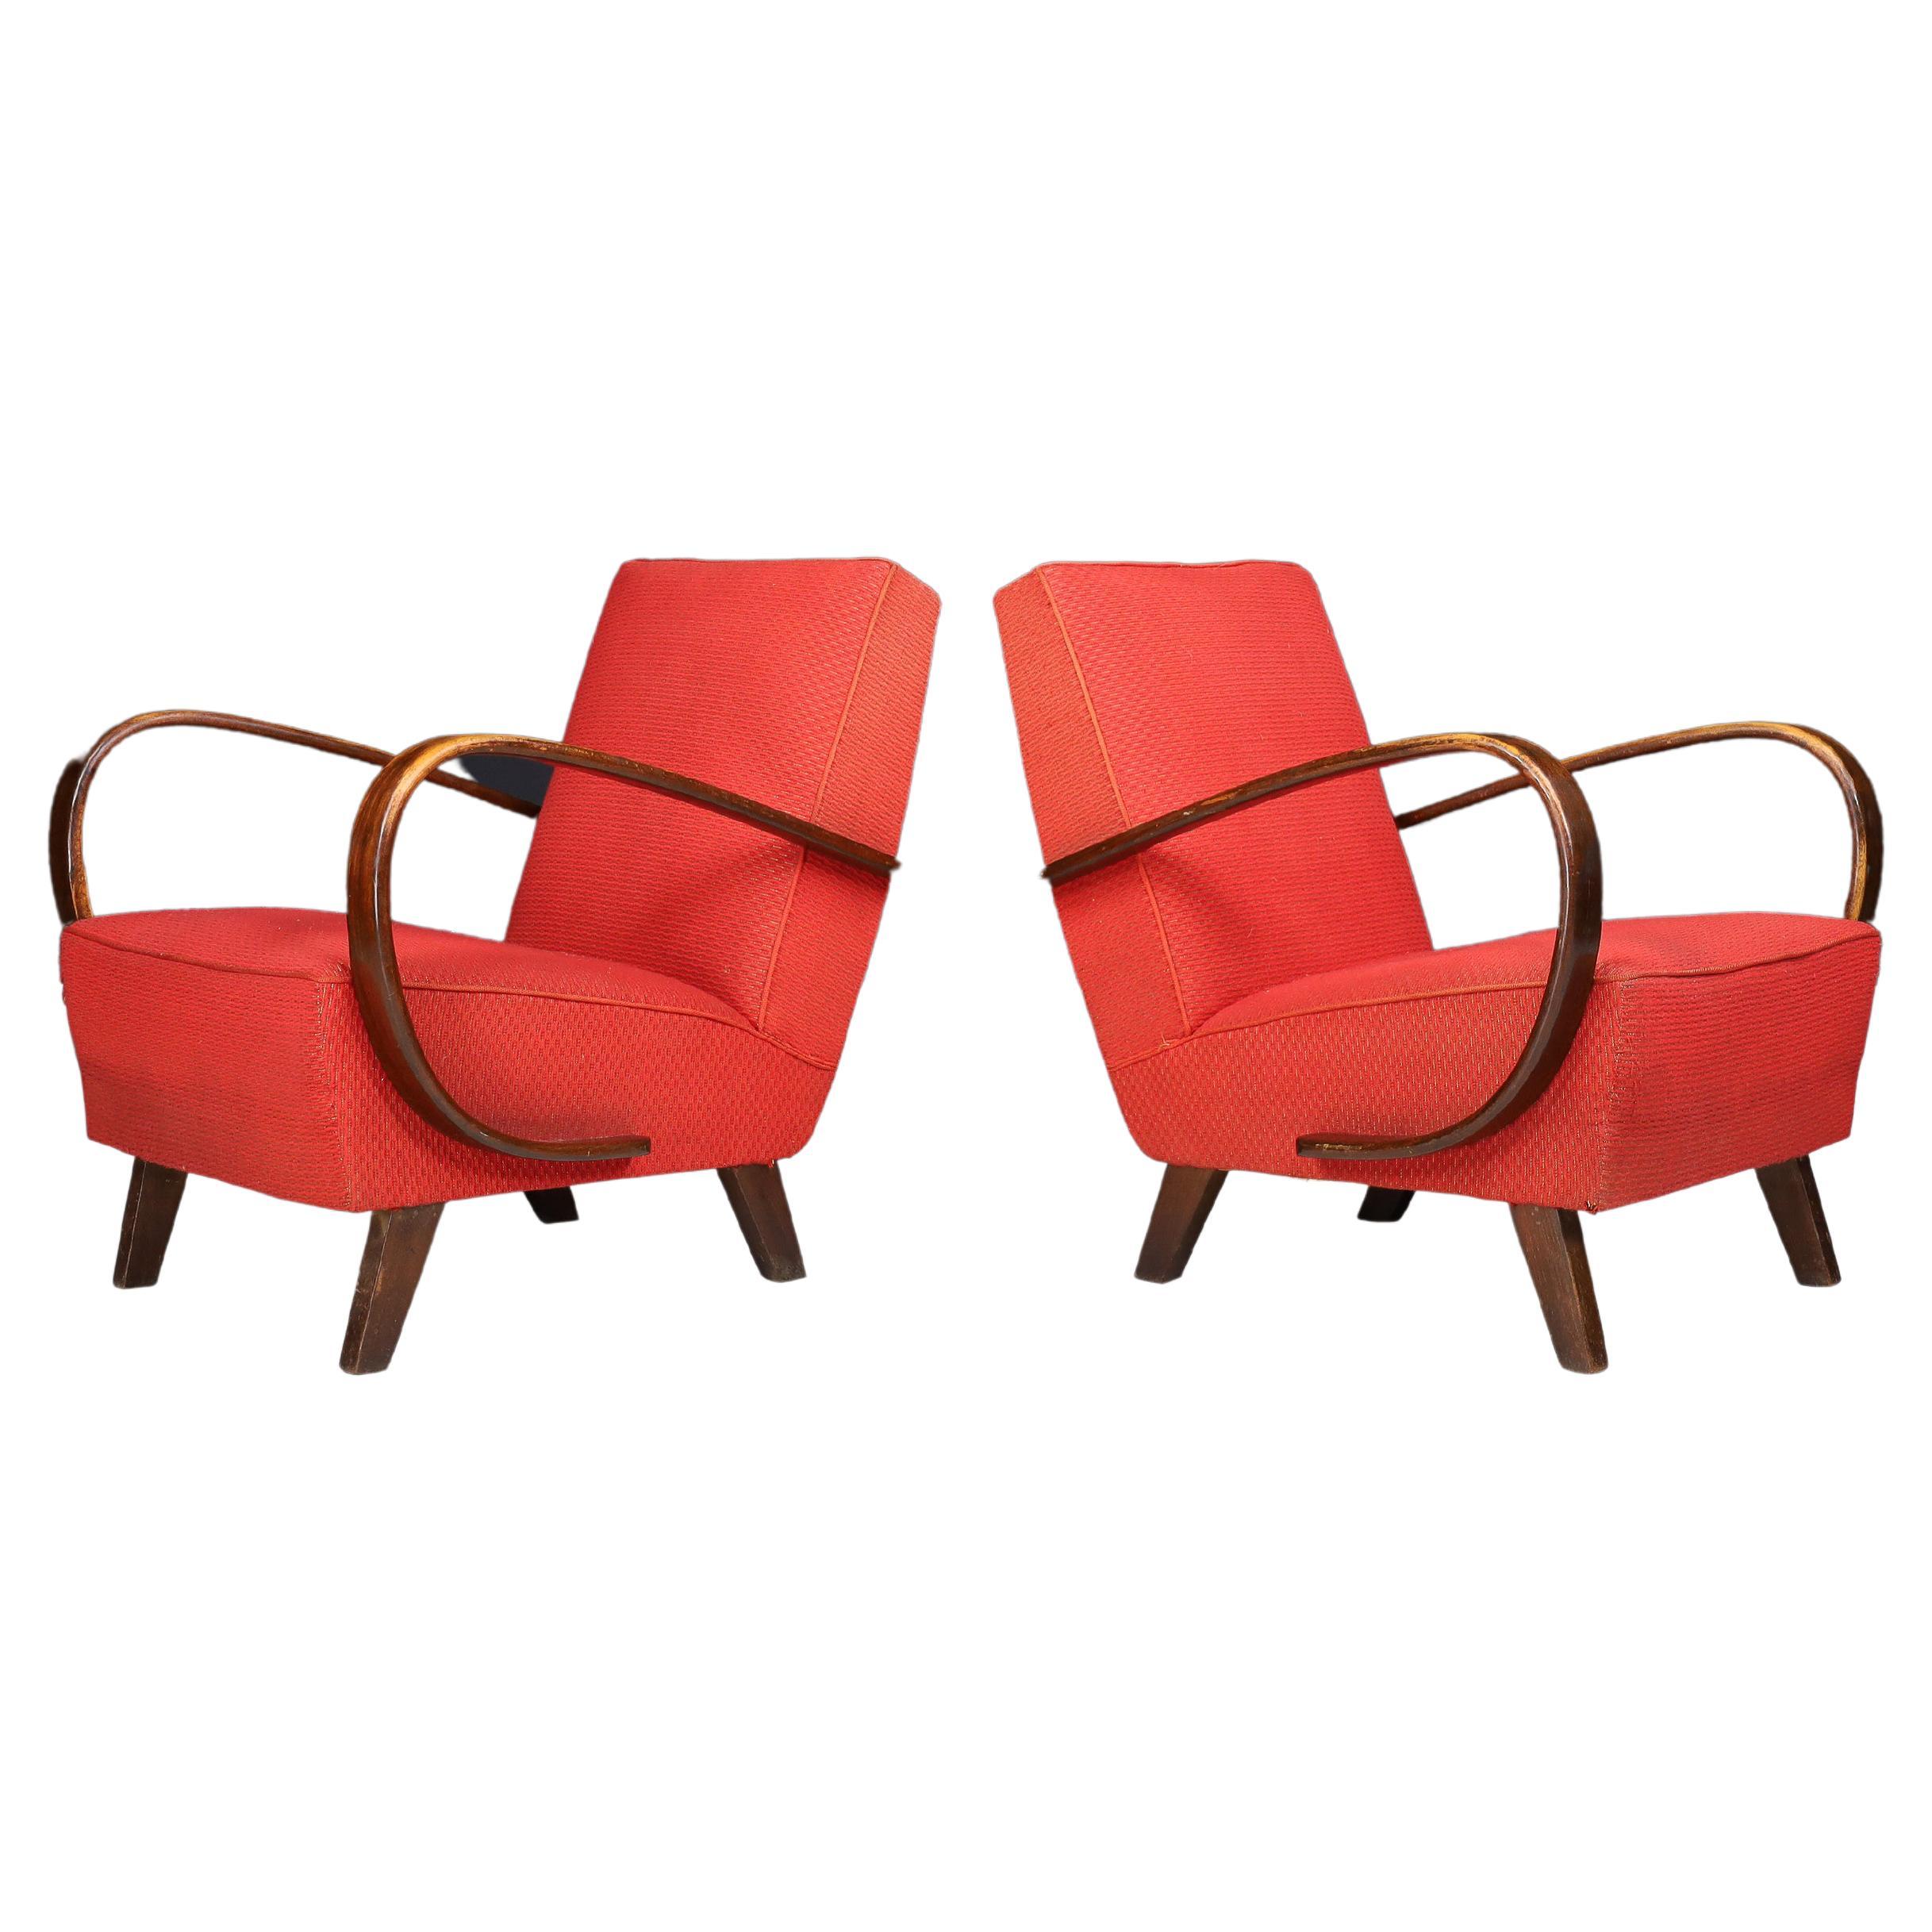 Jindrich Halabala Bentwood Armchairs with Original Upholstery, 1940s